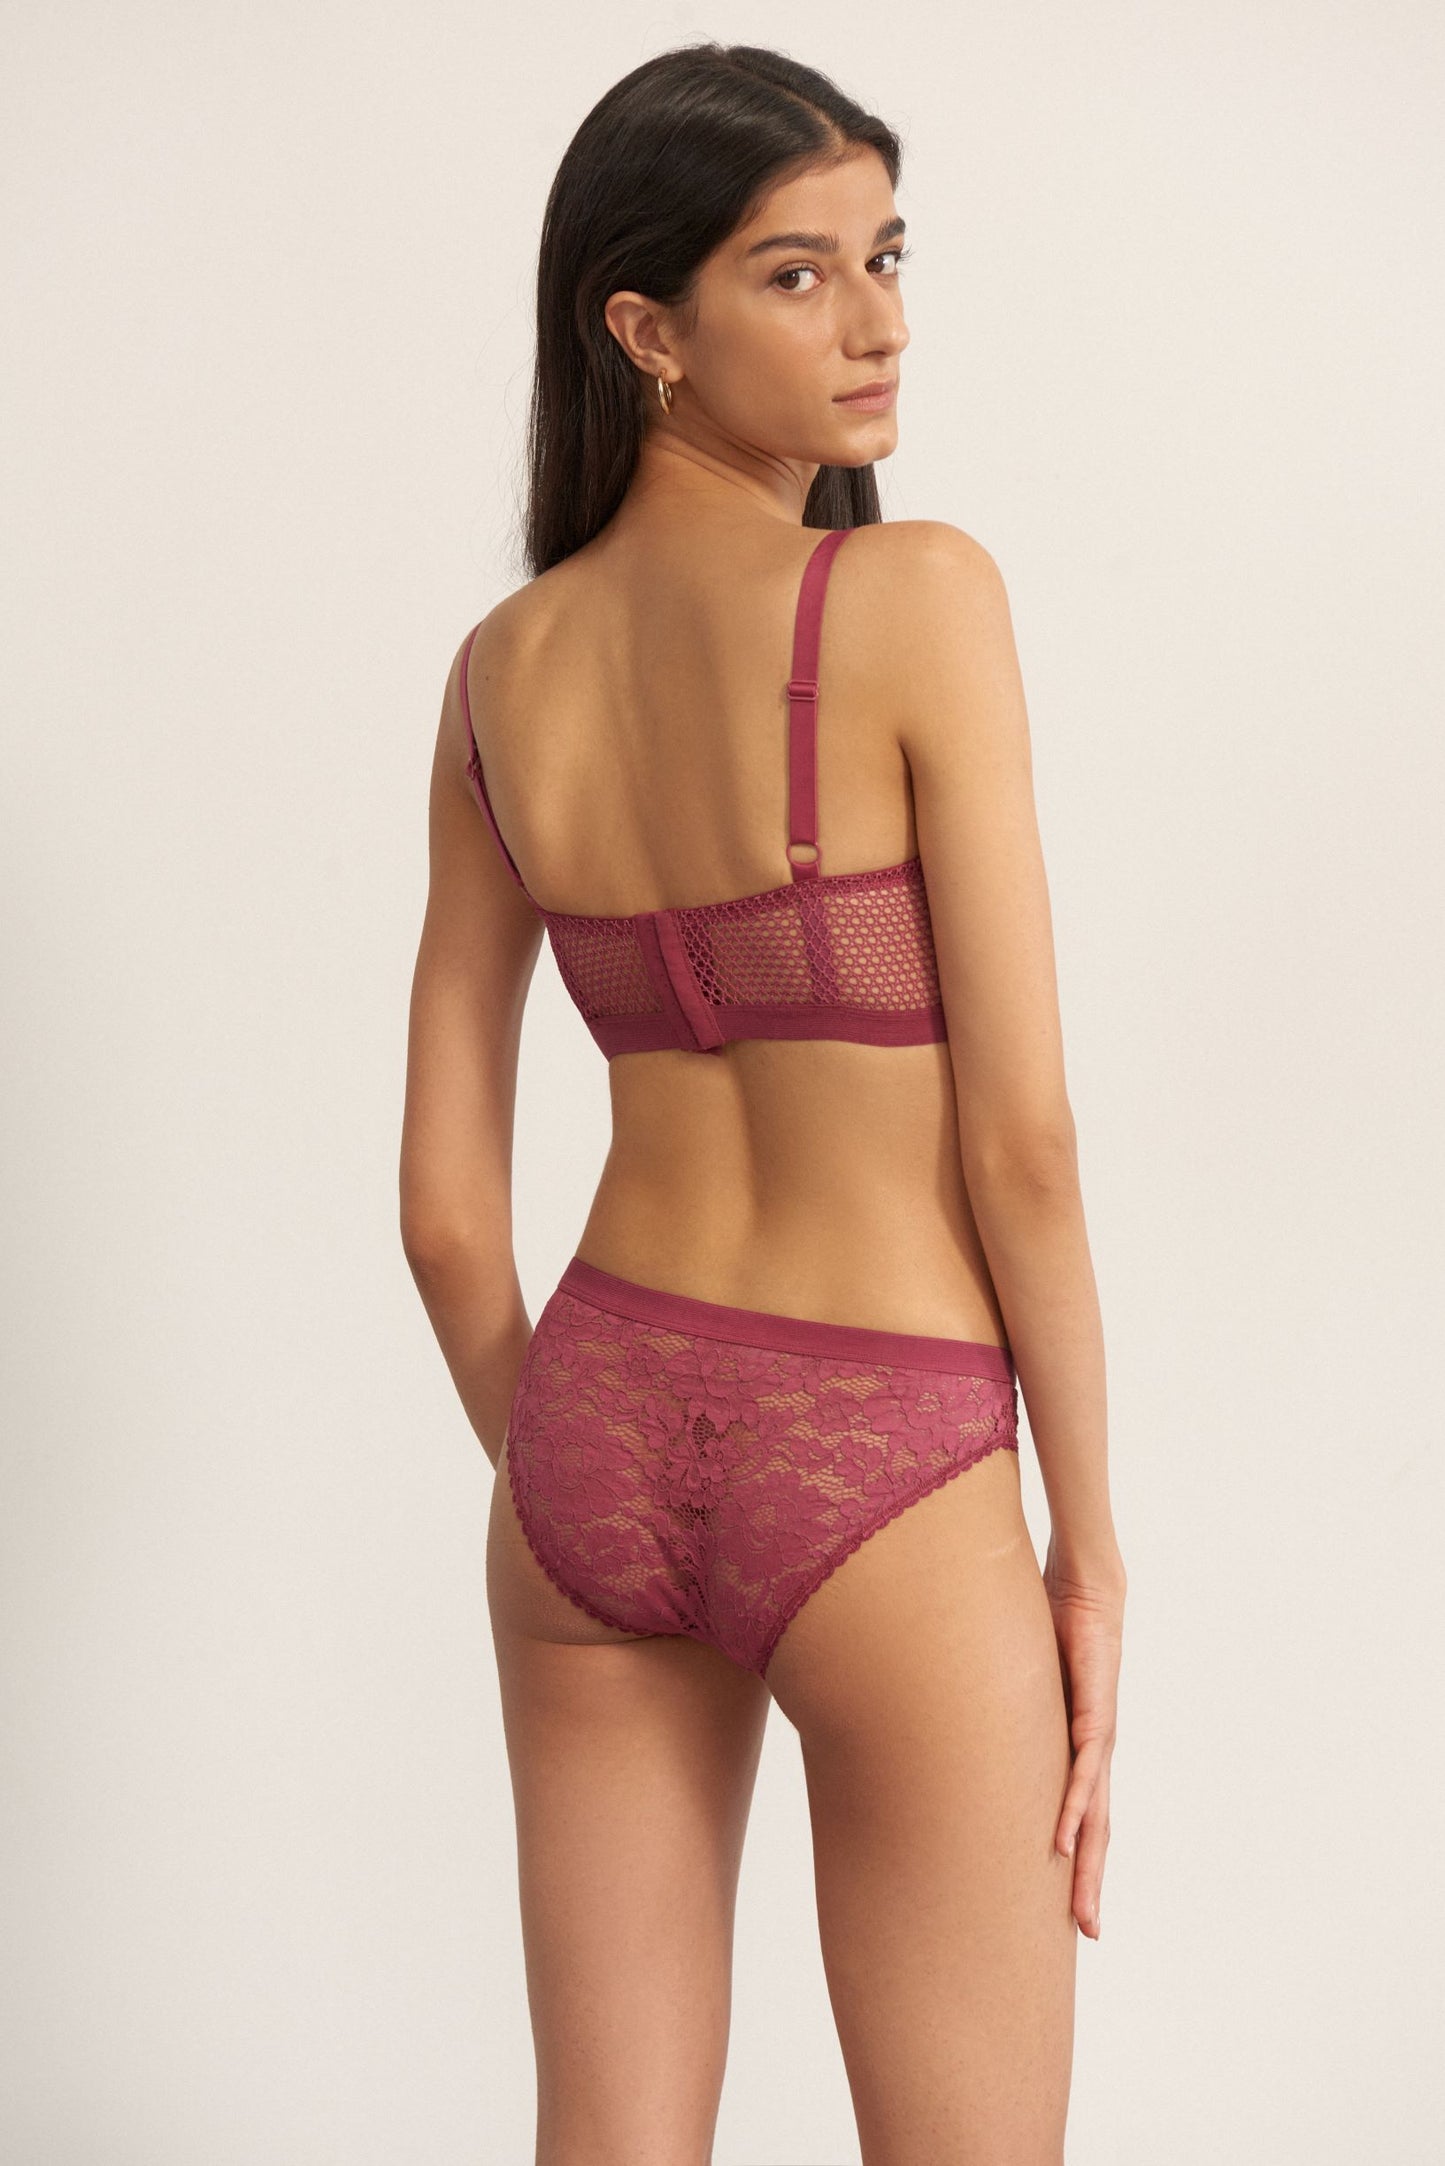 Orchid Lingerie and The Lingerie Room - In summer, skin tone bras are often  the most popular colours. This beautiful new collection from Empreinte  shows that a nude bra is definitely not